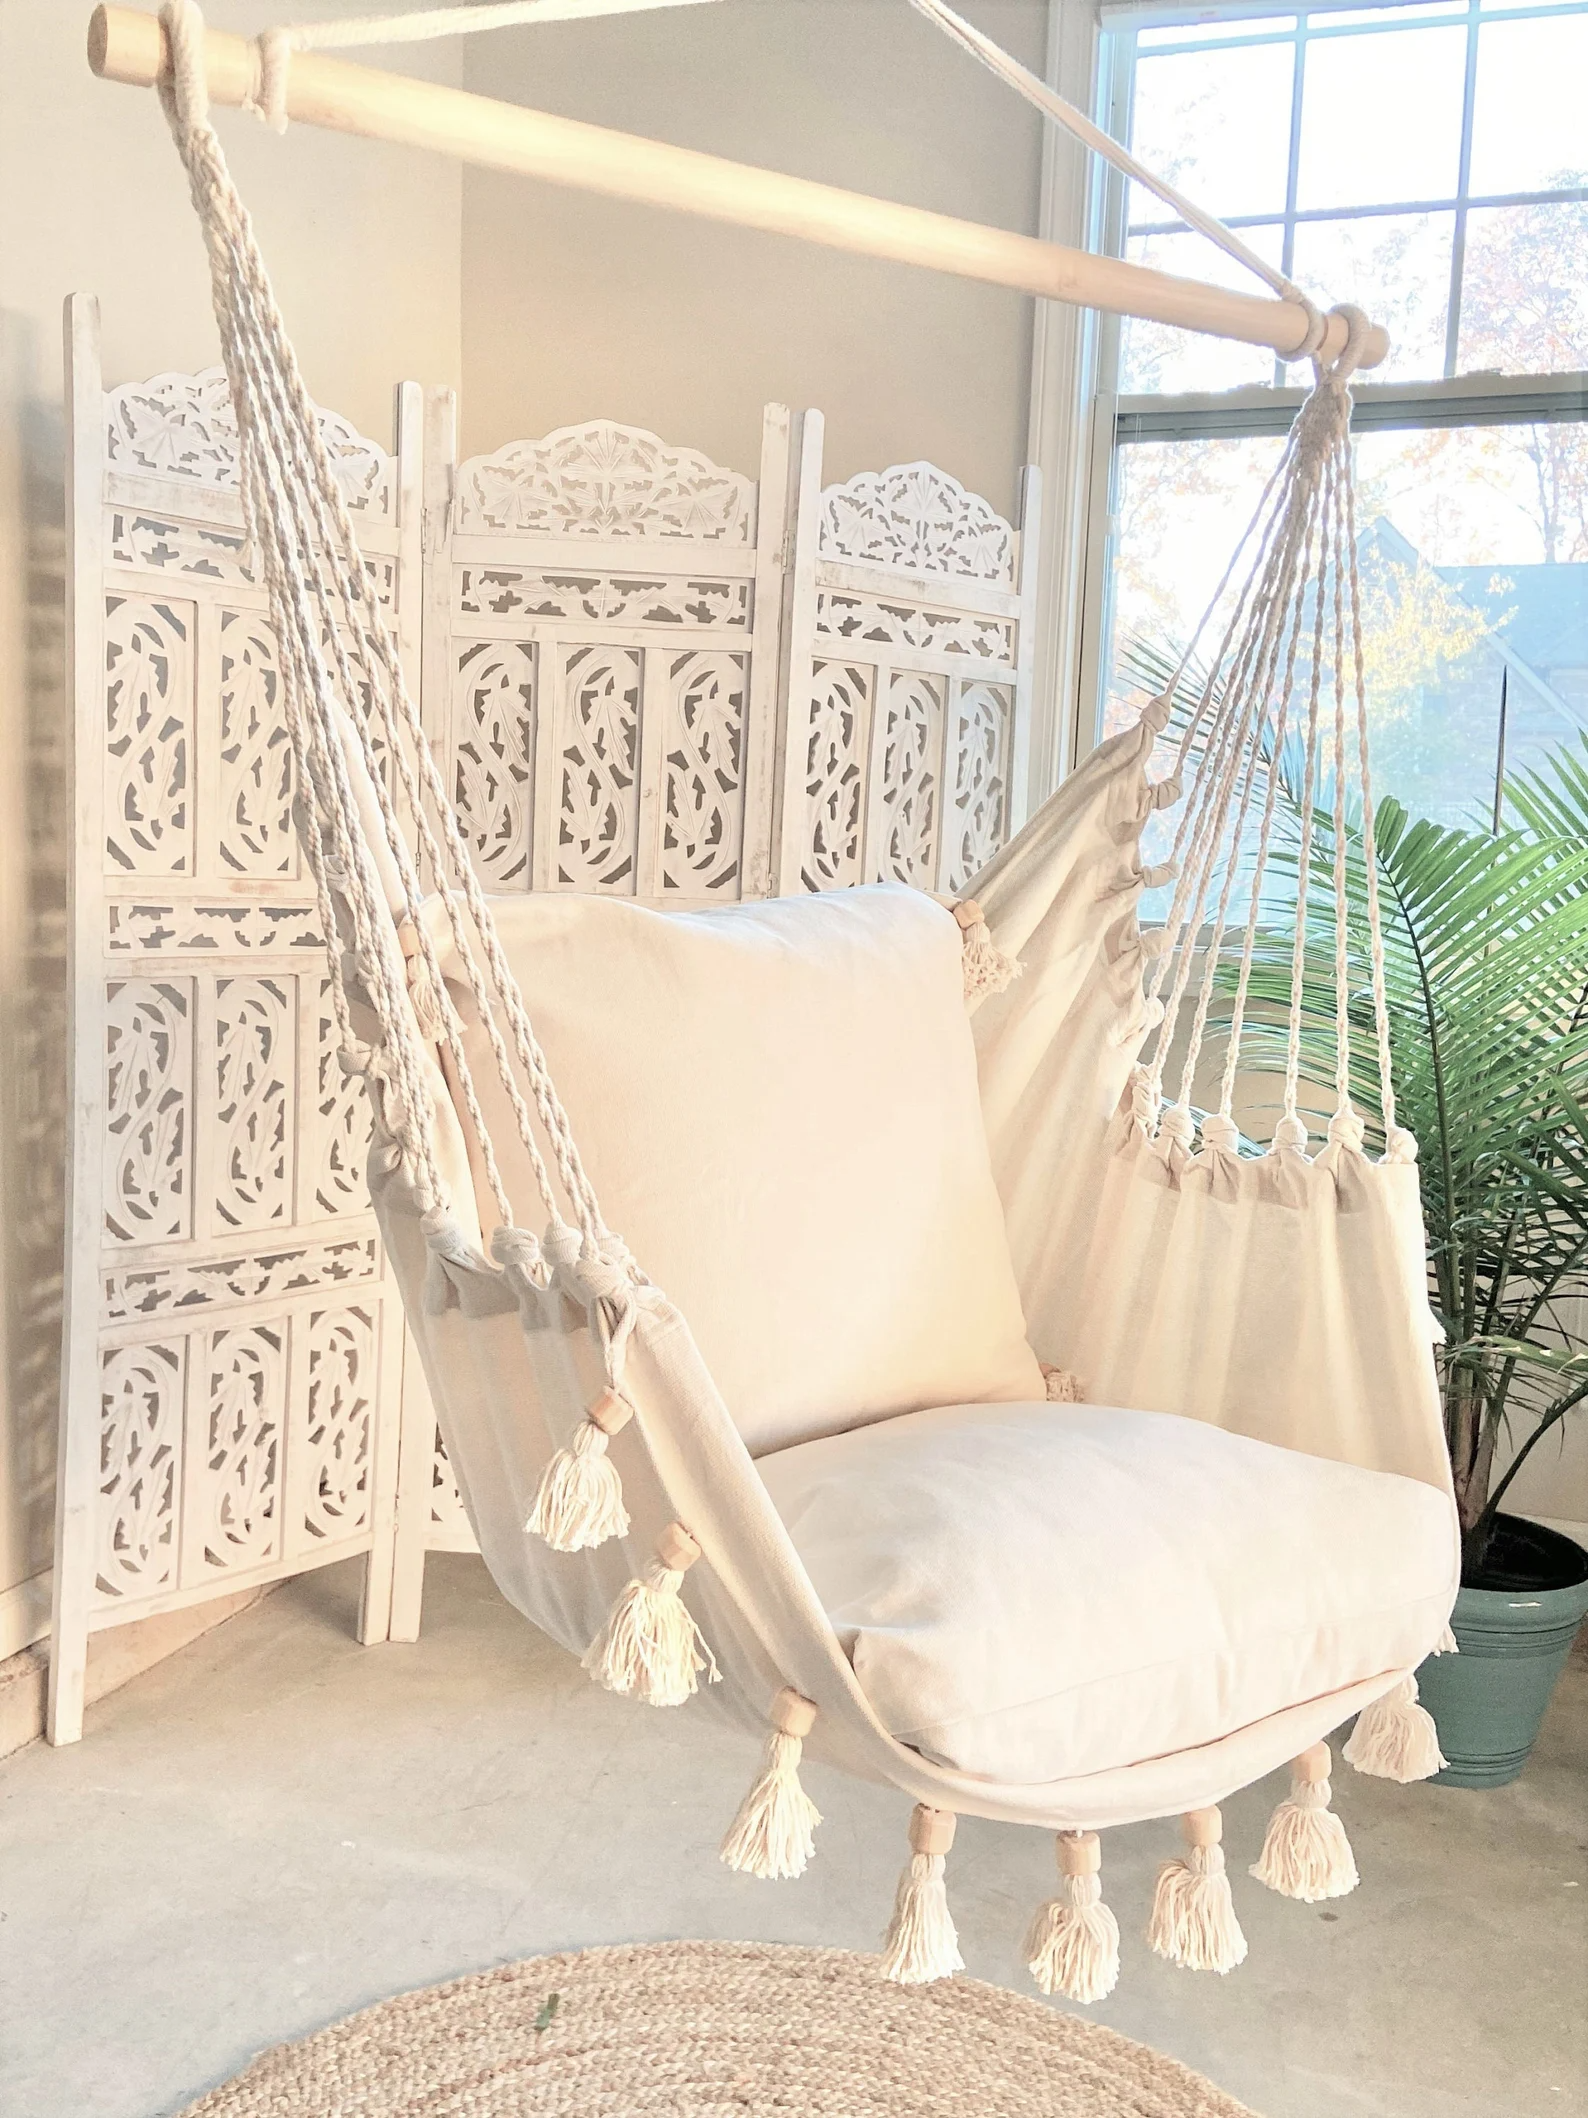 Swing into Comfort: Relaxing with Hammock Chairs